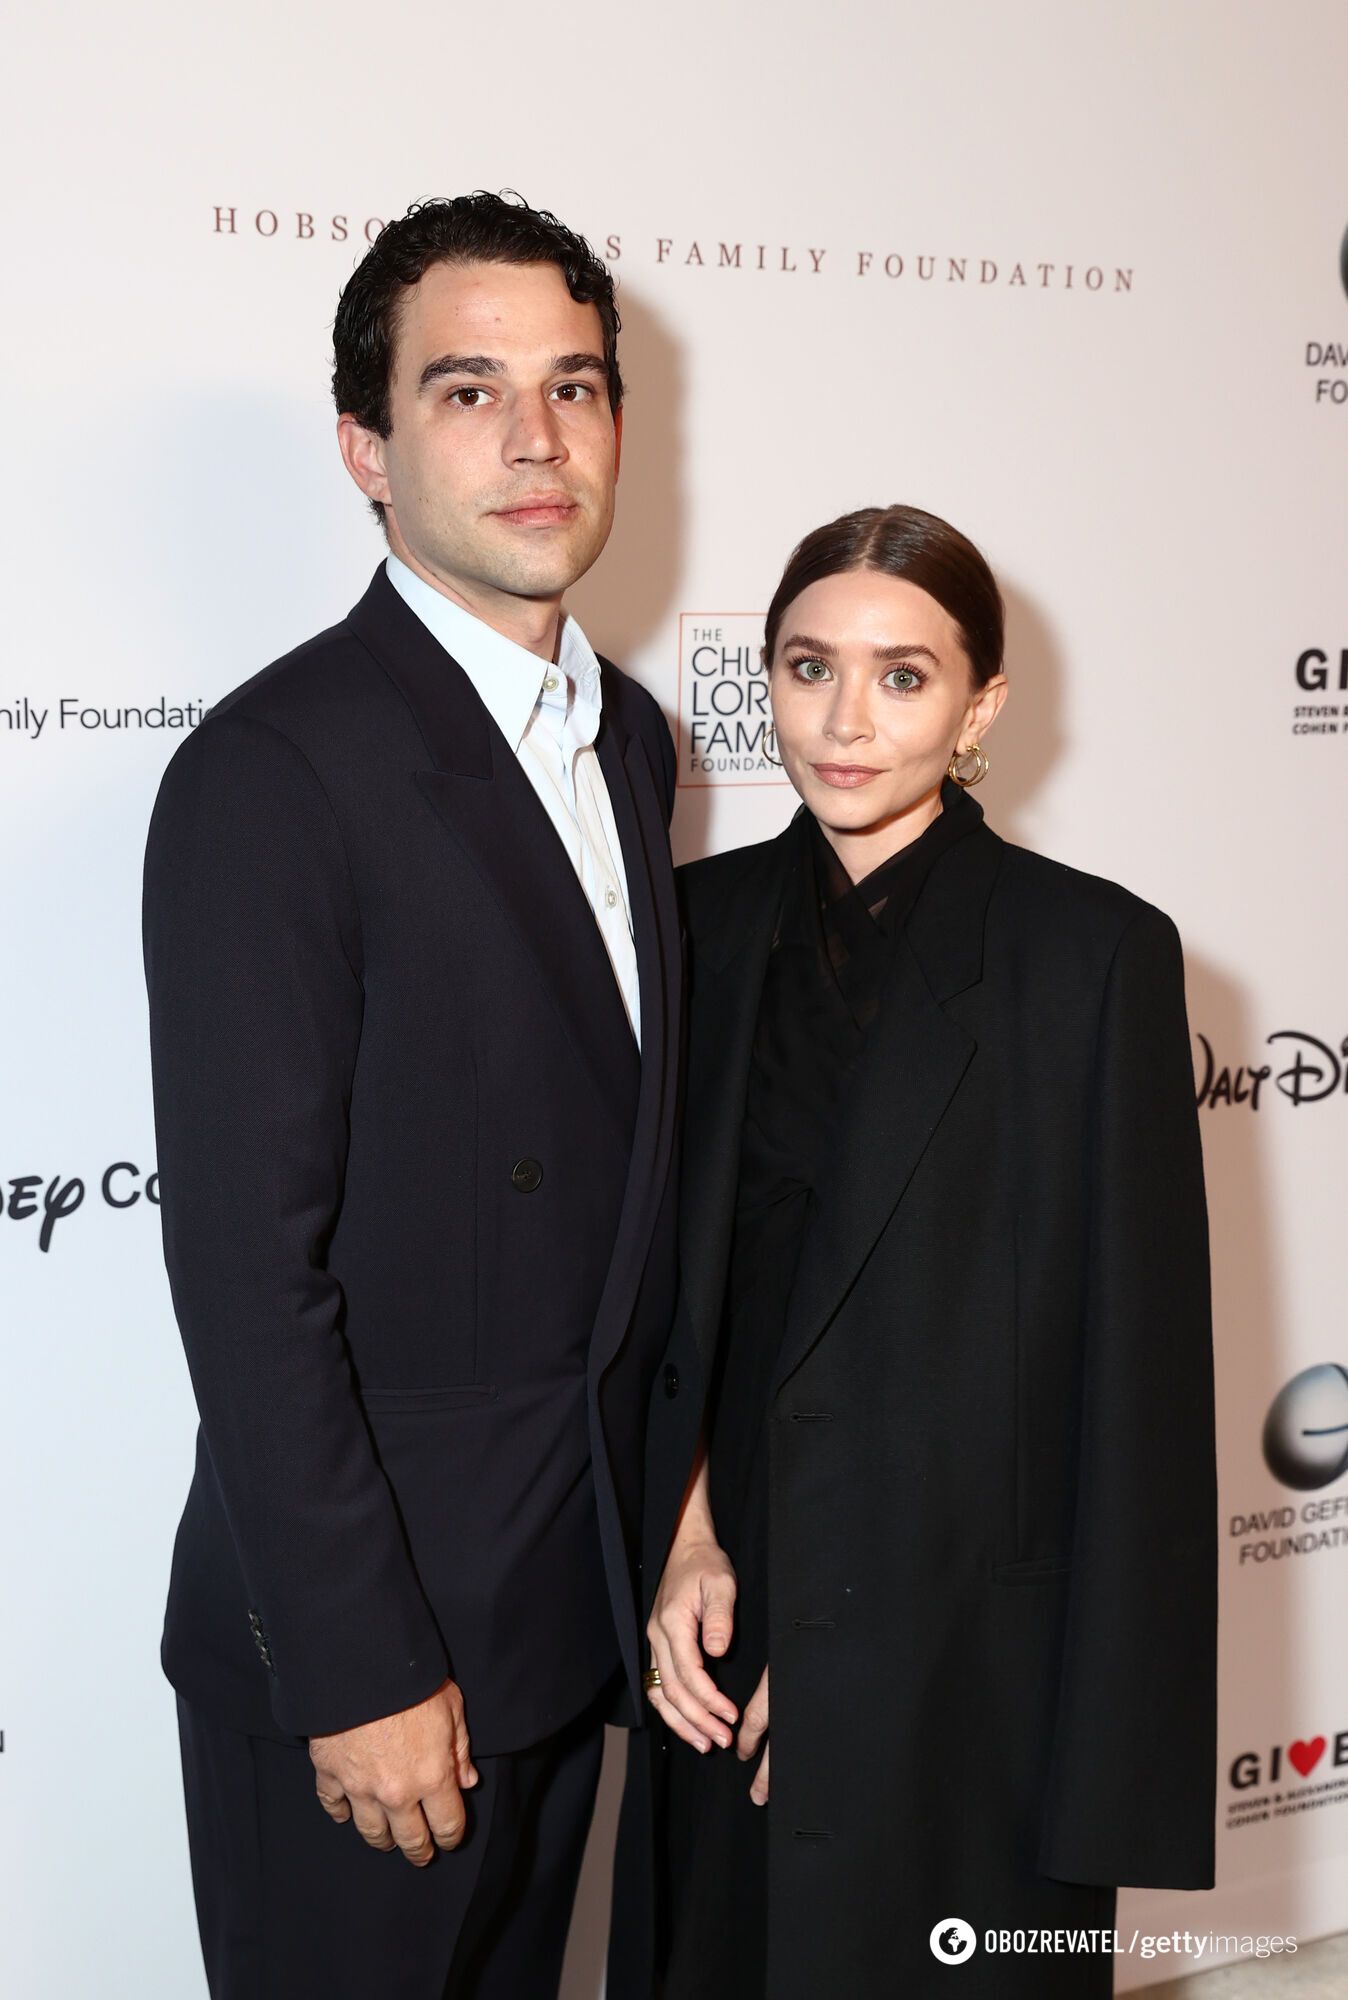 Never told anyone about the pregnancy: It Takes Two star Ashley Olsen became a mom for the first time